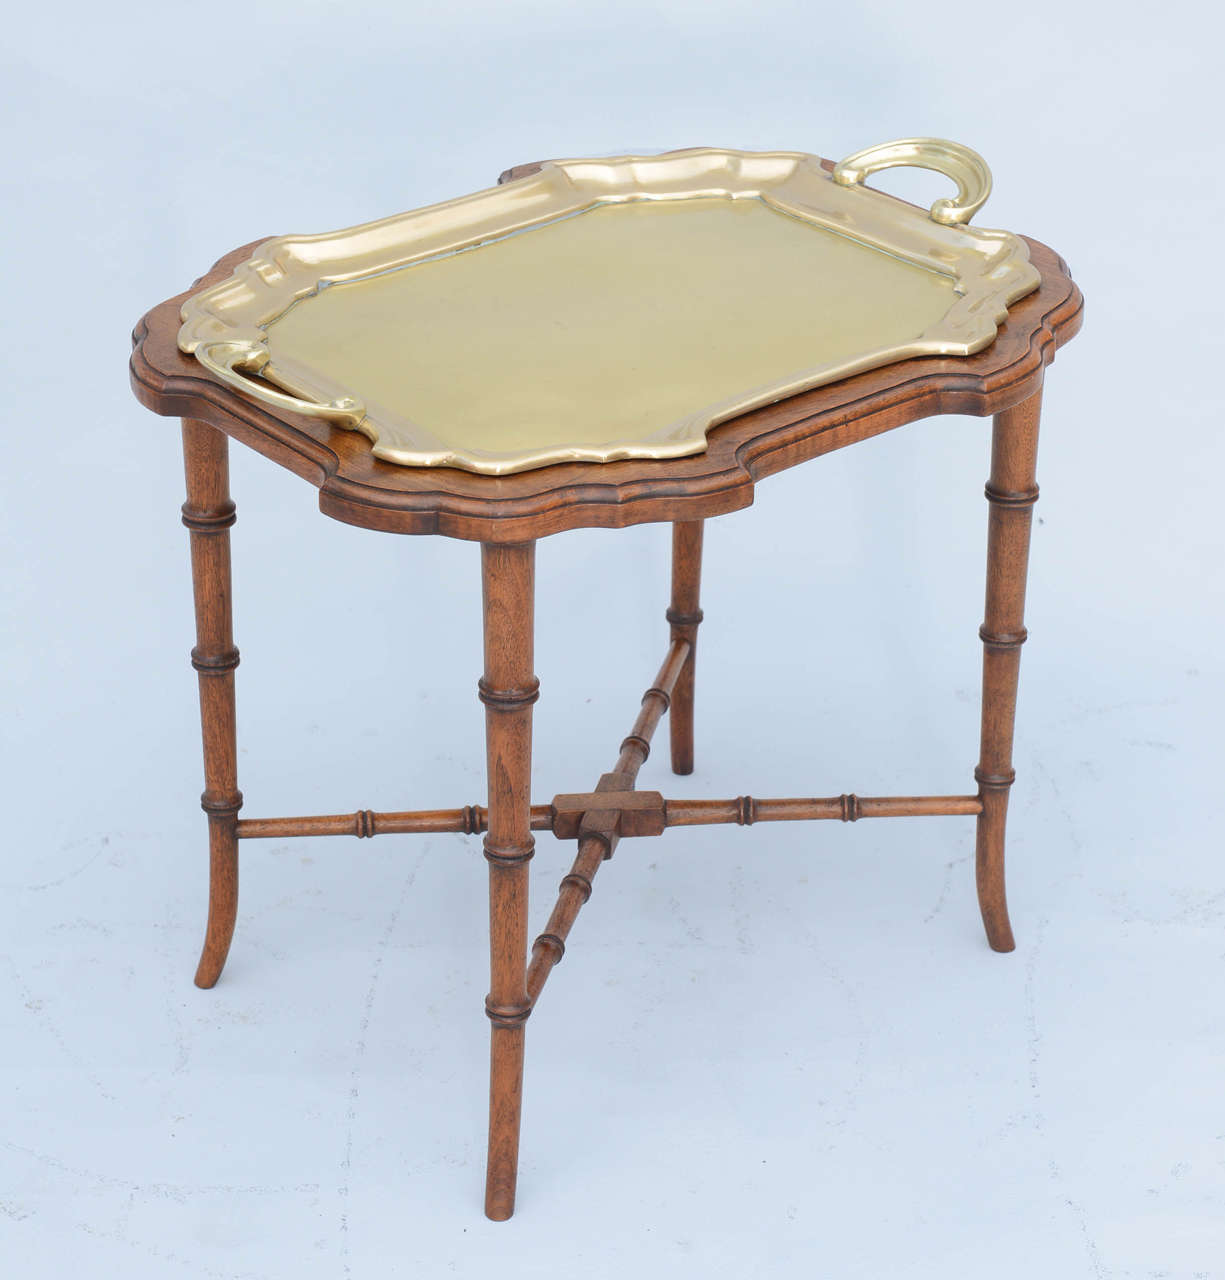 Tray table, having serpentine shaped brass tray with handles, inserted in conforming walnut frame, raised on faux bamboo legs with X-stretcher.